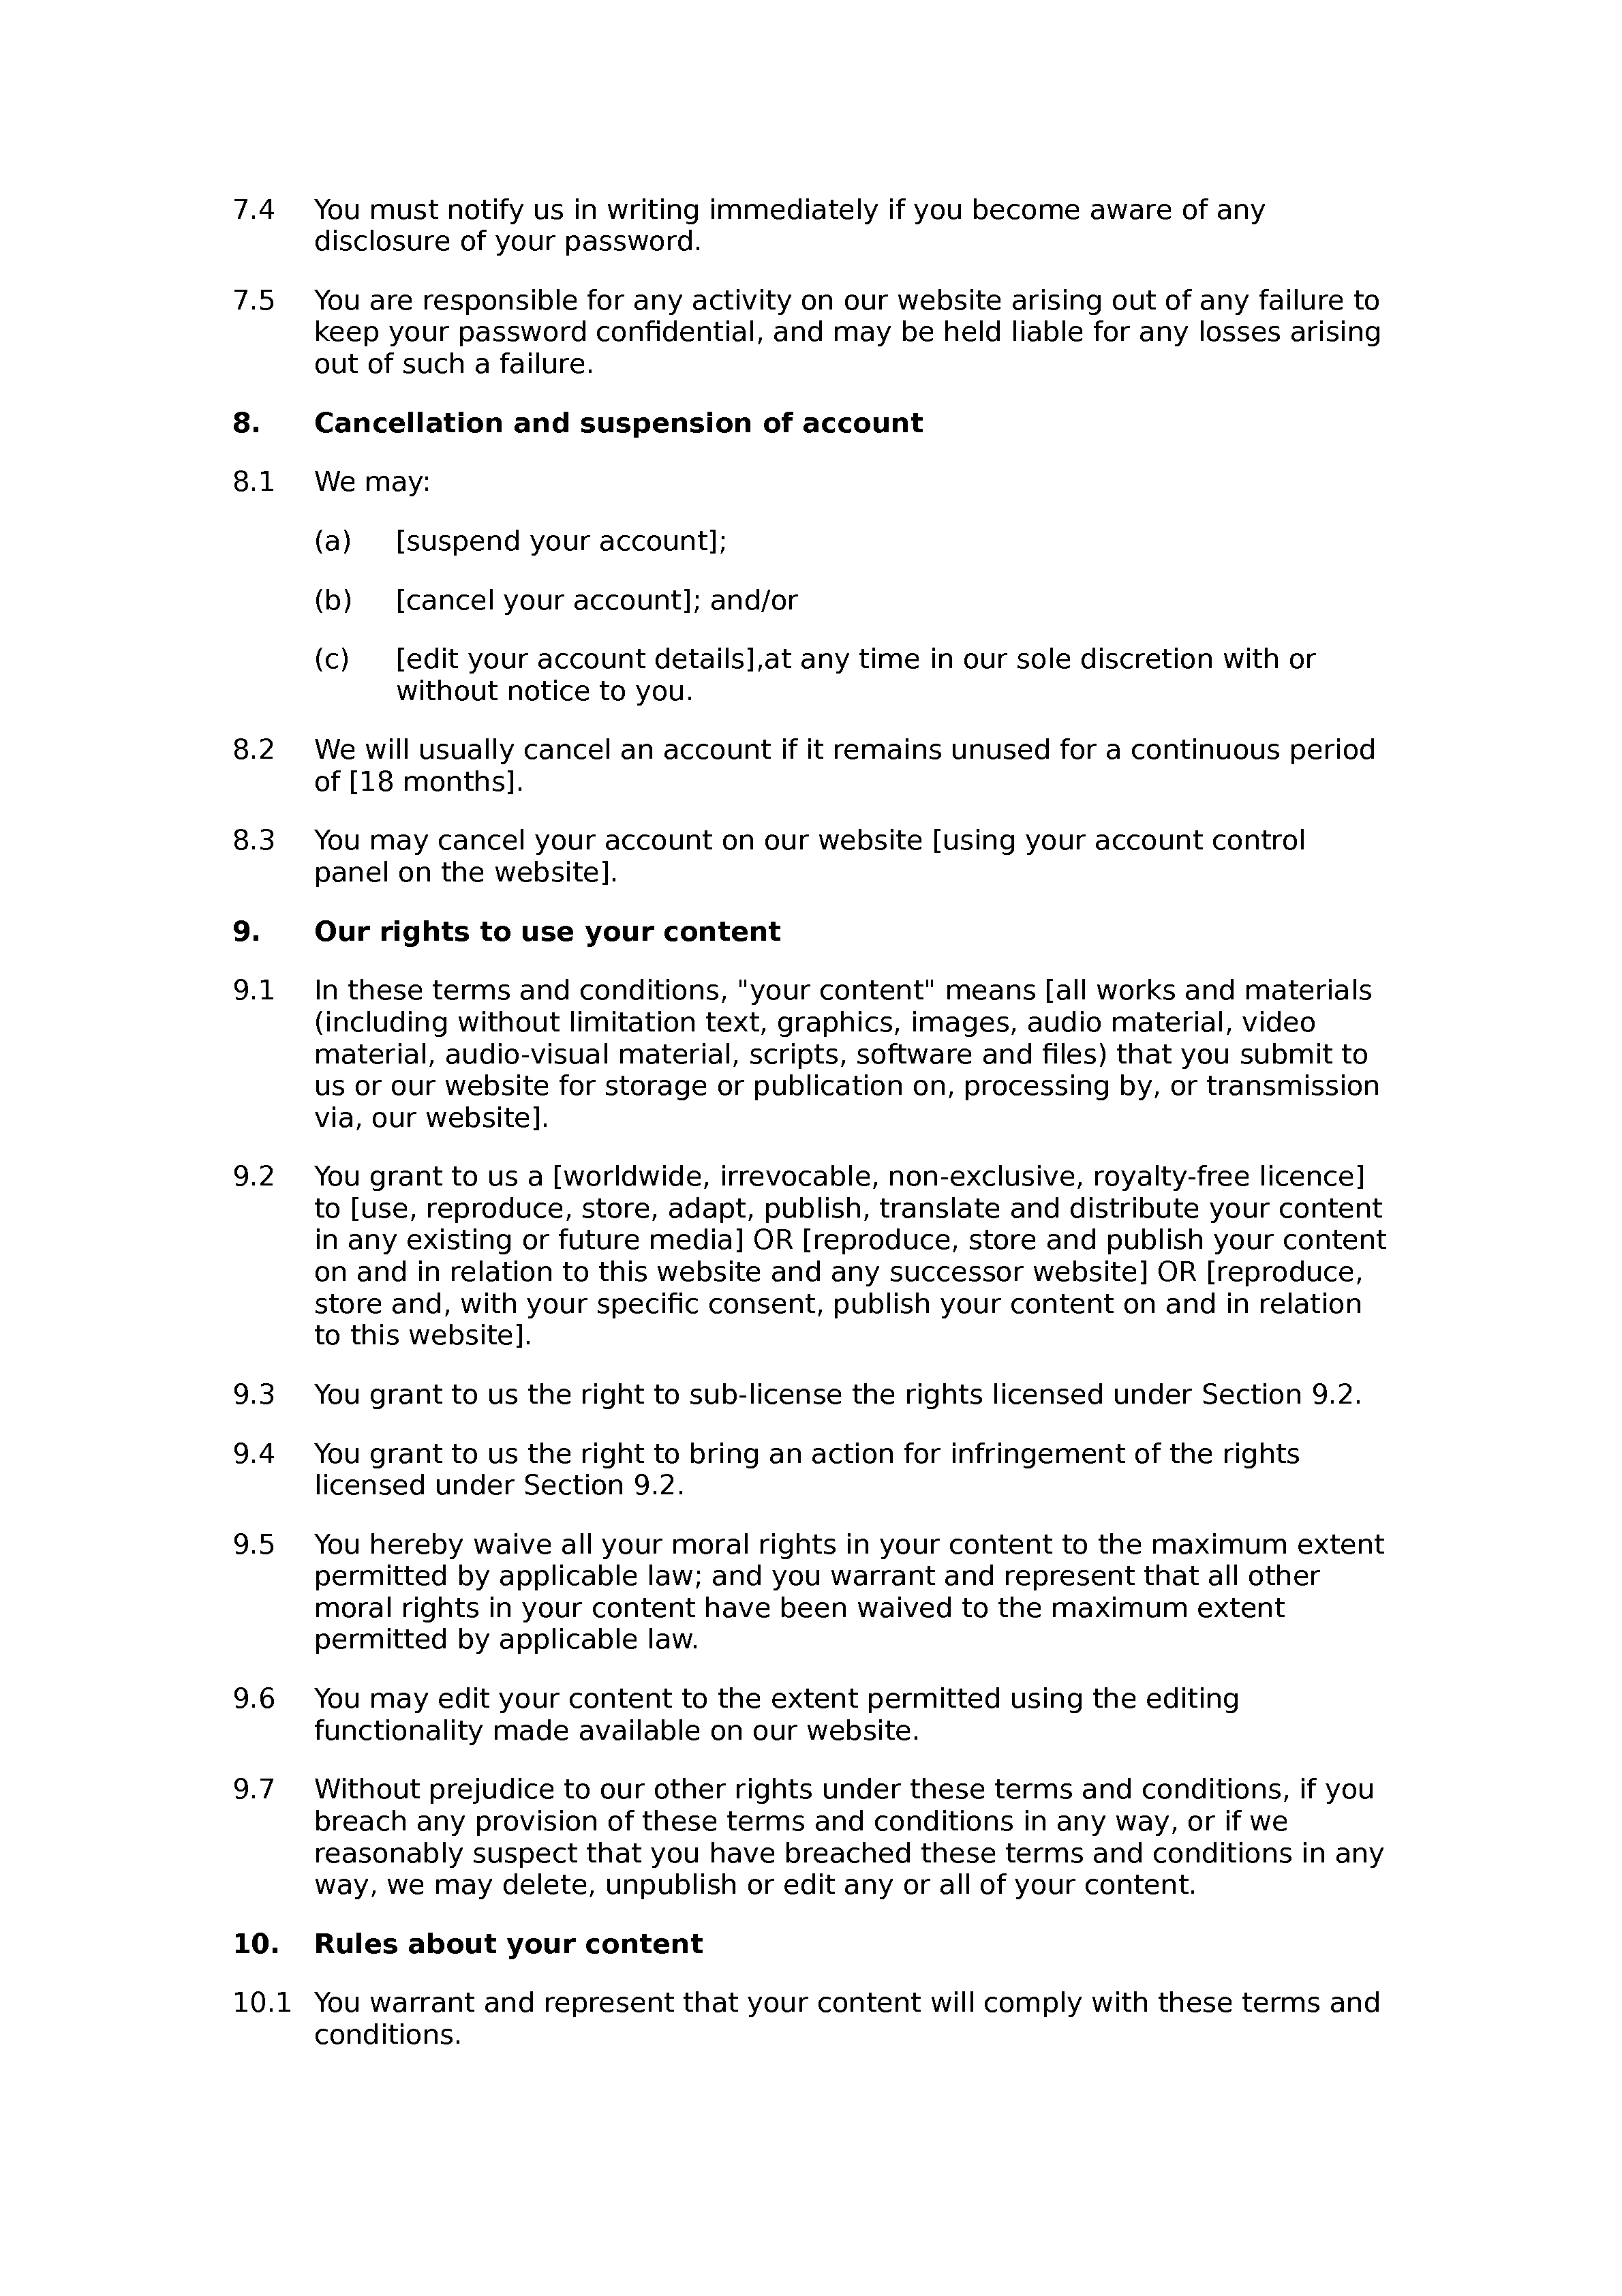 Online shop terms and conditions document preview